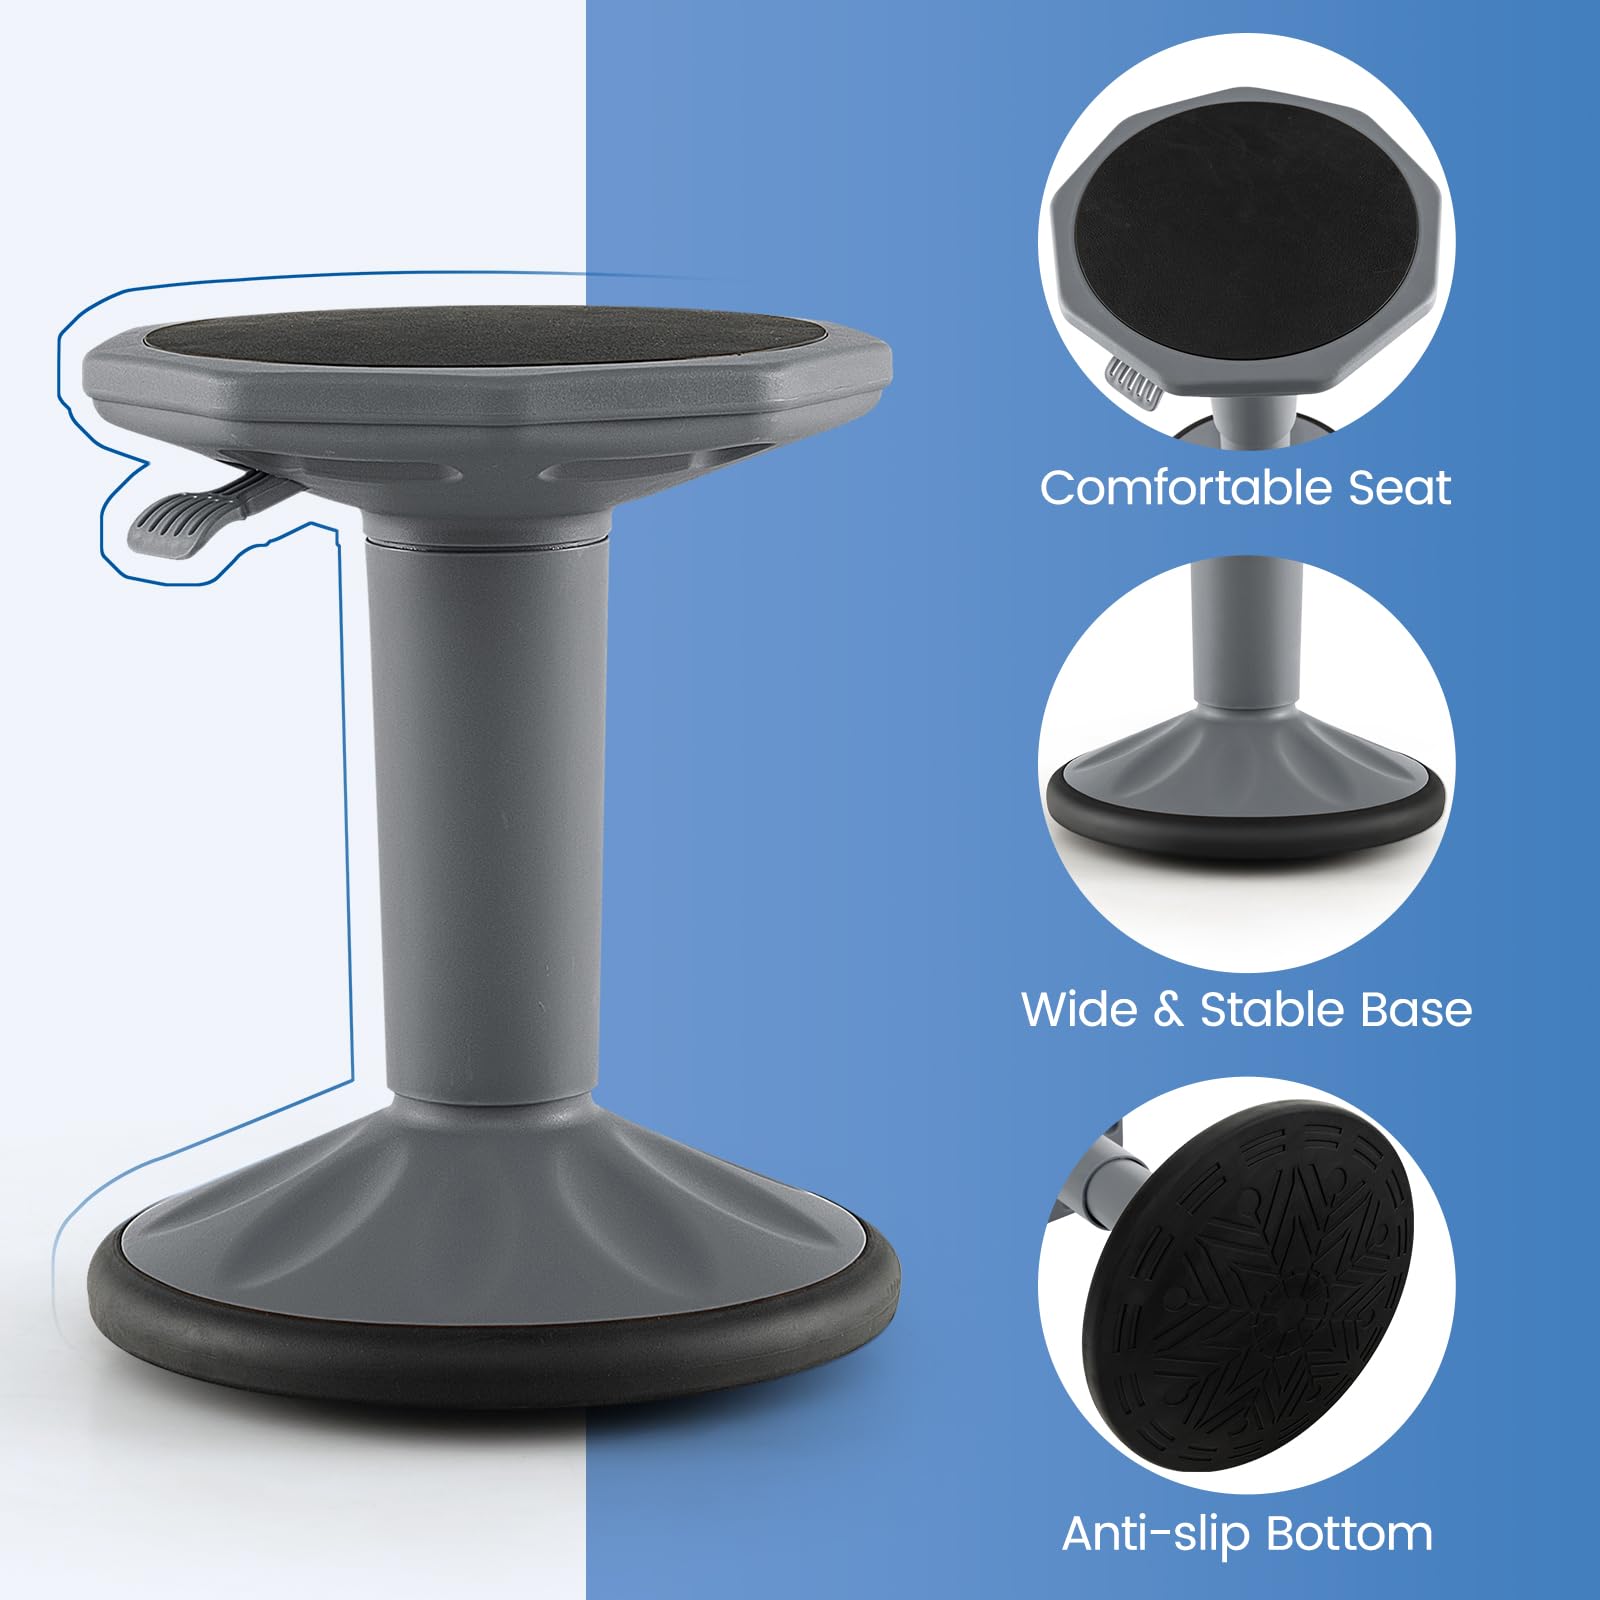 Giantex Wobble Stools for Classroom Seating - Wiggle Stool with Adjustable Height